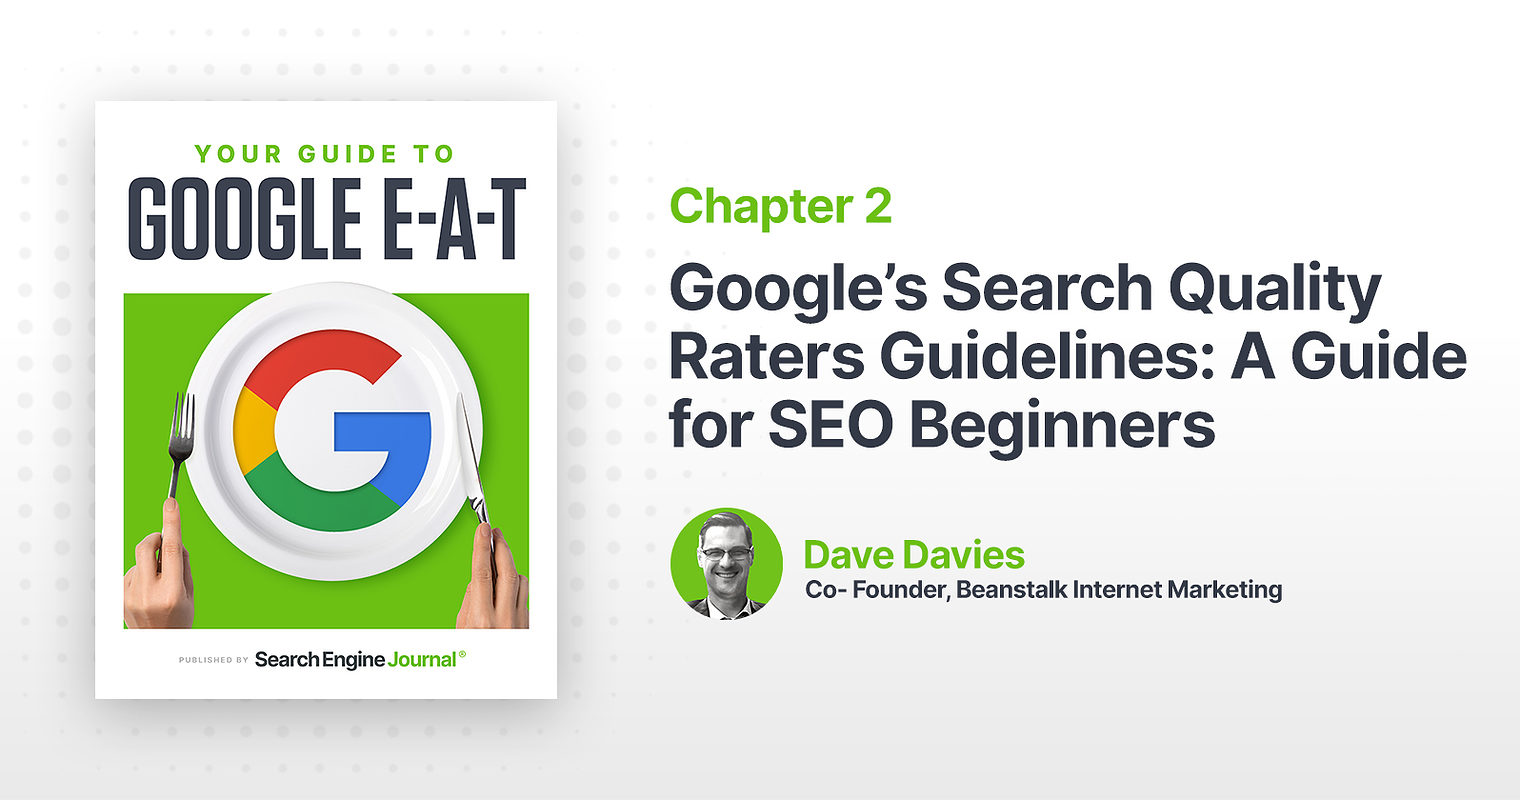 Google’s Search Quality Raters Guidelines: A Guide for SEO Beginners